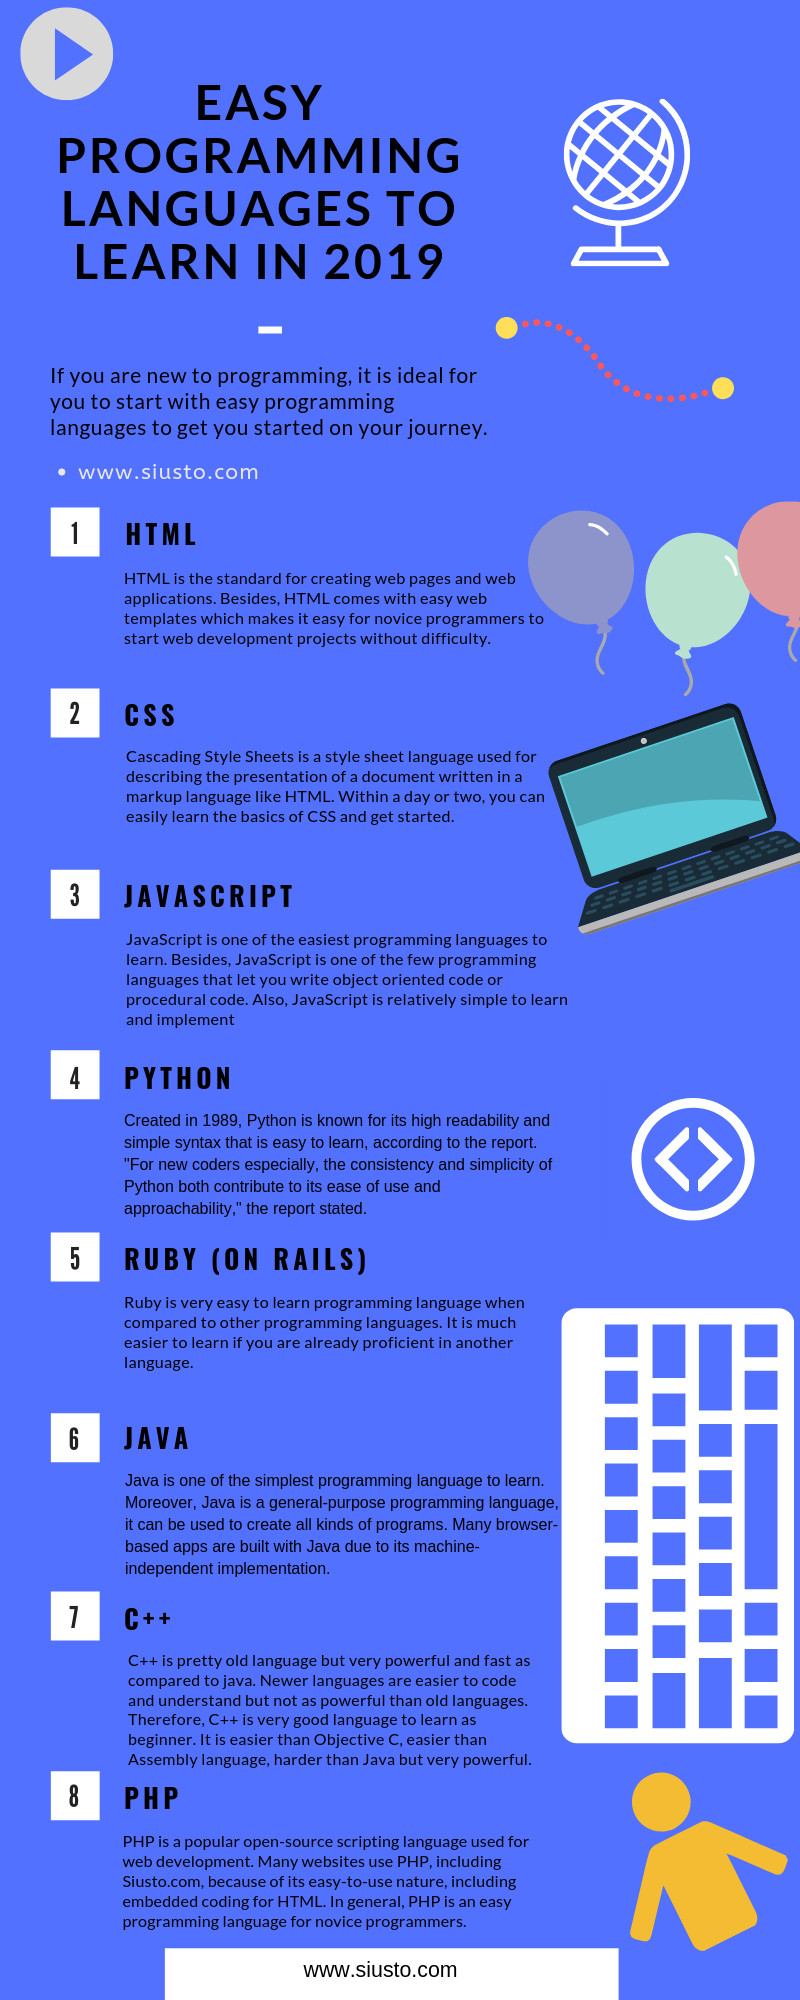 the easiest programming language to learn in 2019